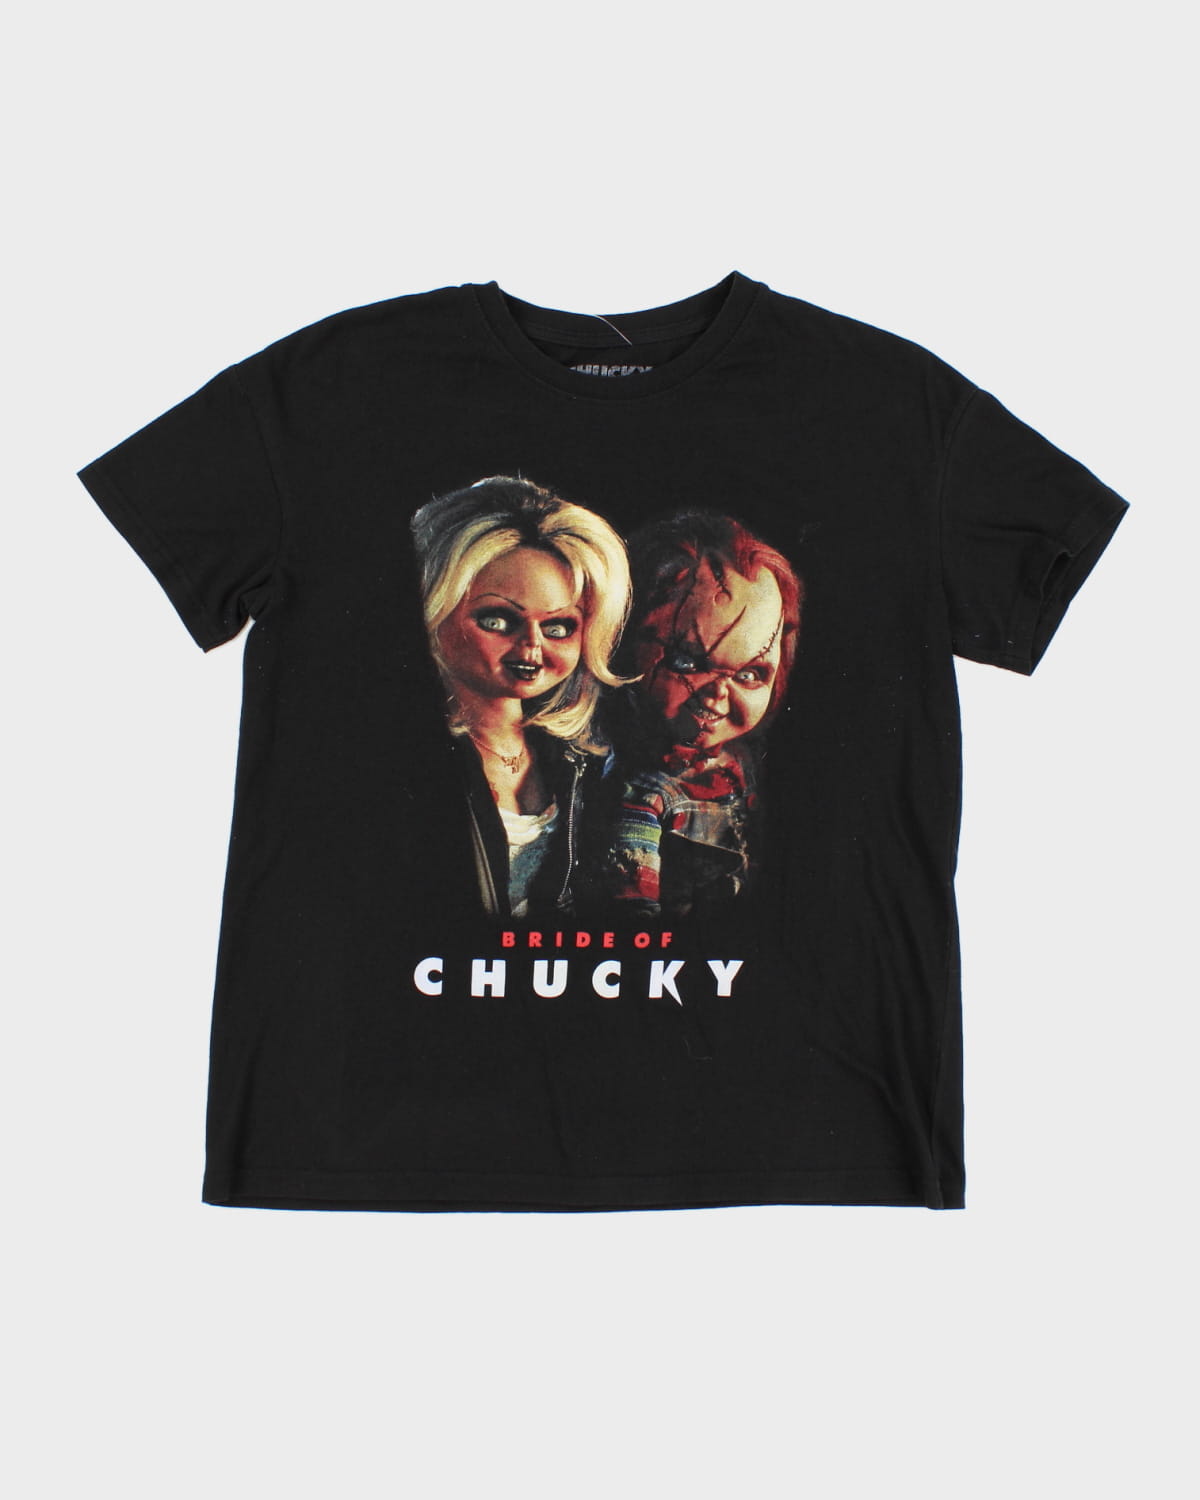 Bride Of Chucky Graphic T-Shirt - S